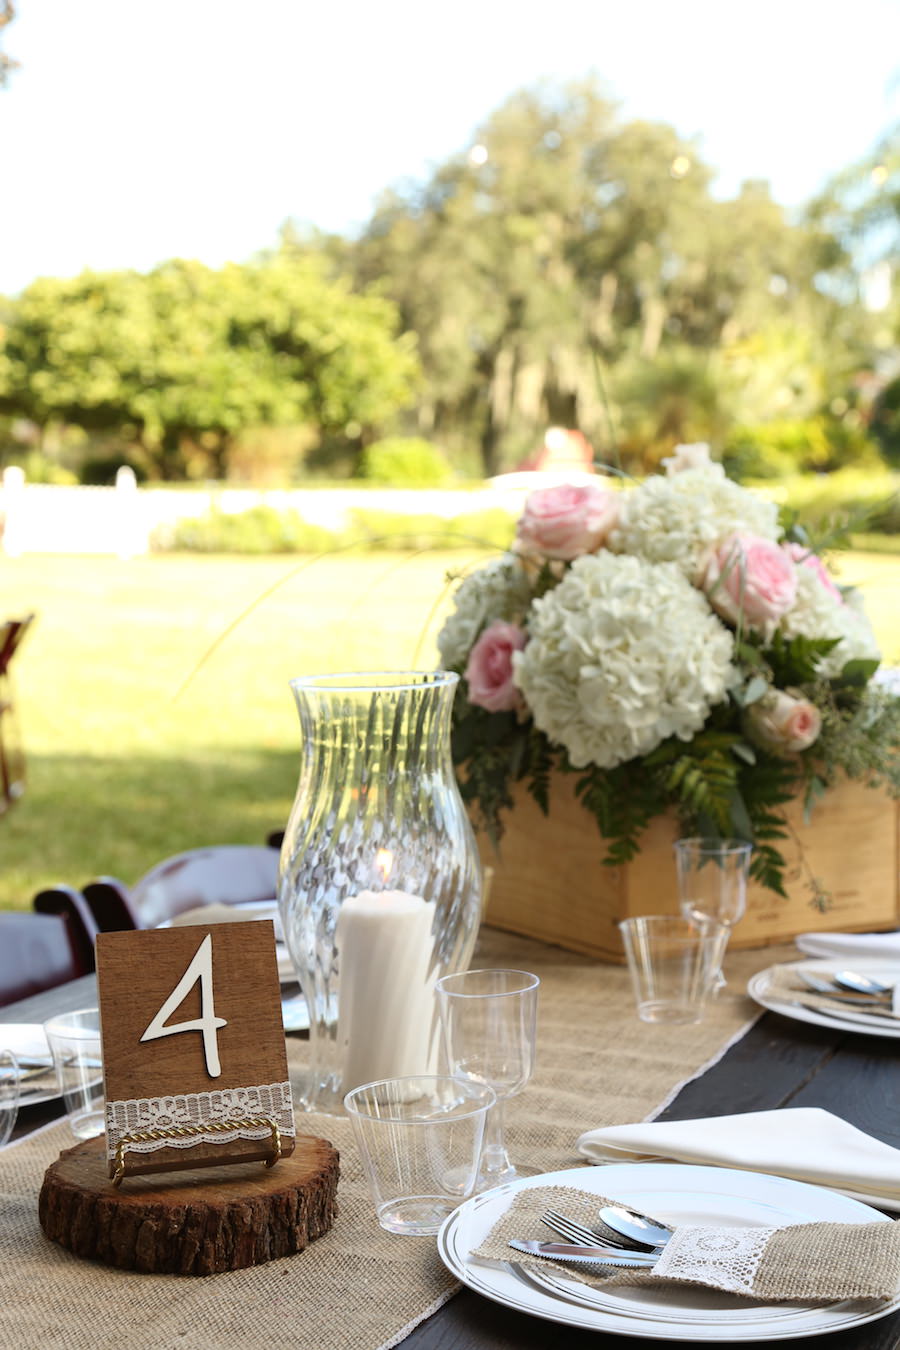 Outdoor, Rustic Lakeland Wedding Reception Table Decor with Wooden Vase and White and Pink Floral Centerpieces in Wooden Box and Candlelight